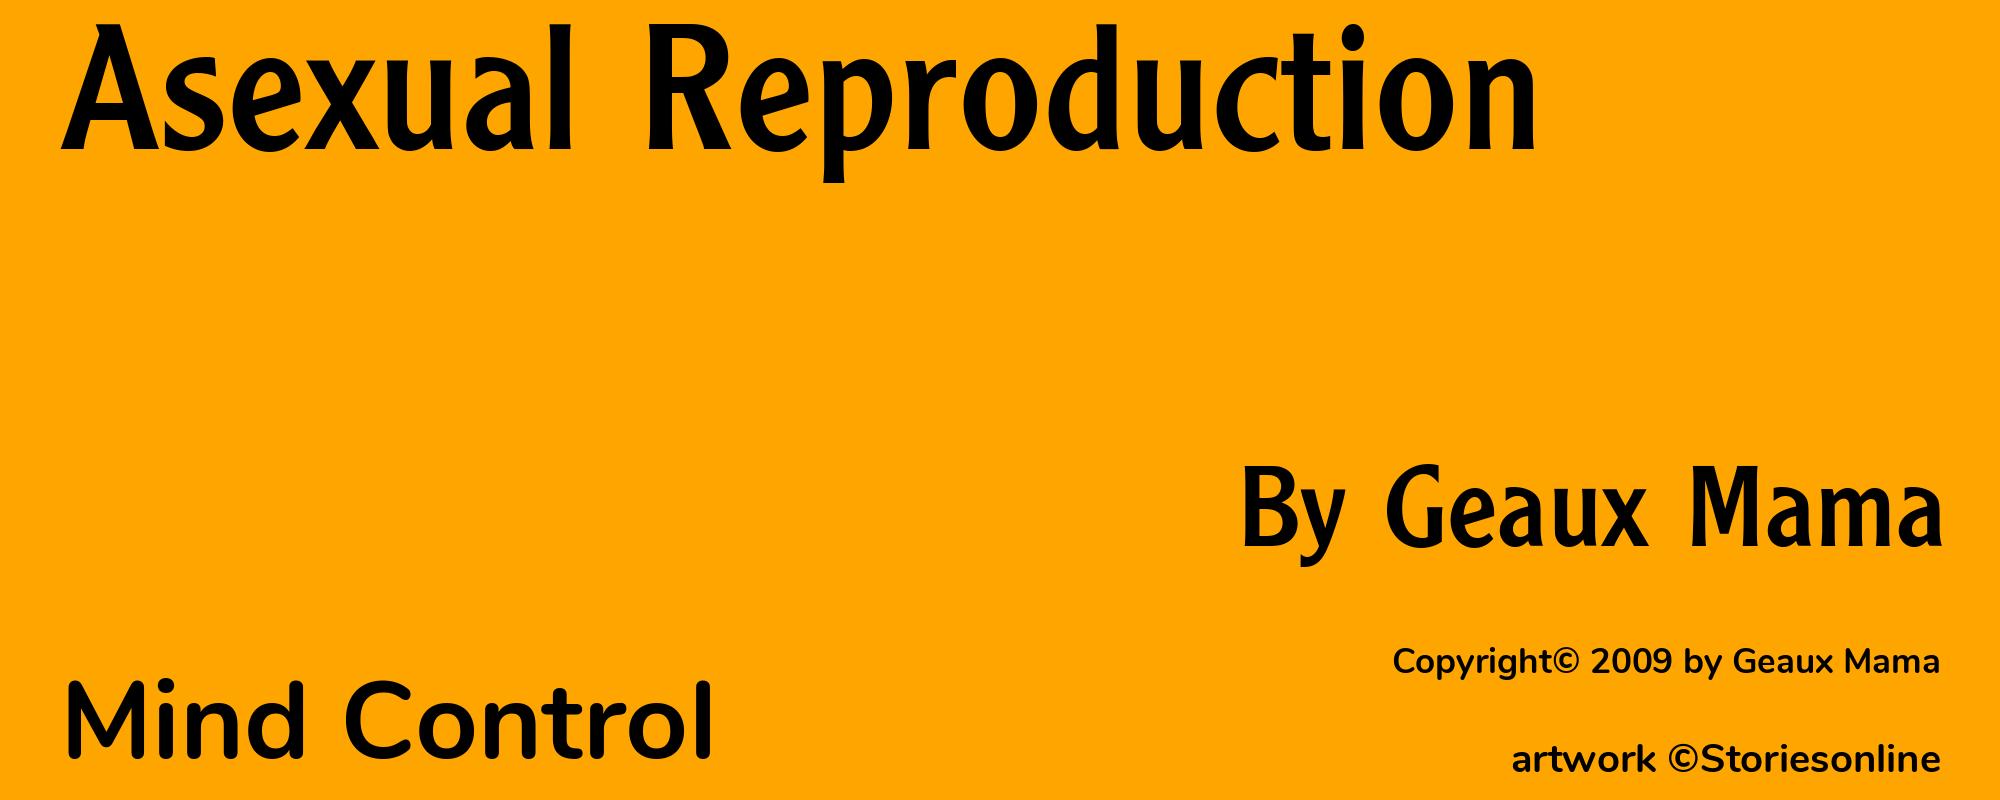 Asexual Reproduction - Cover